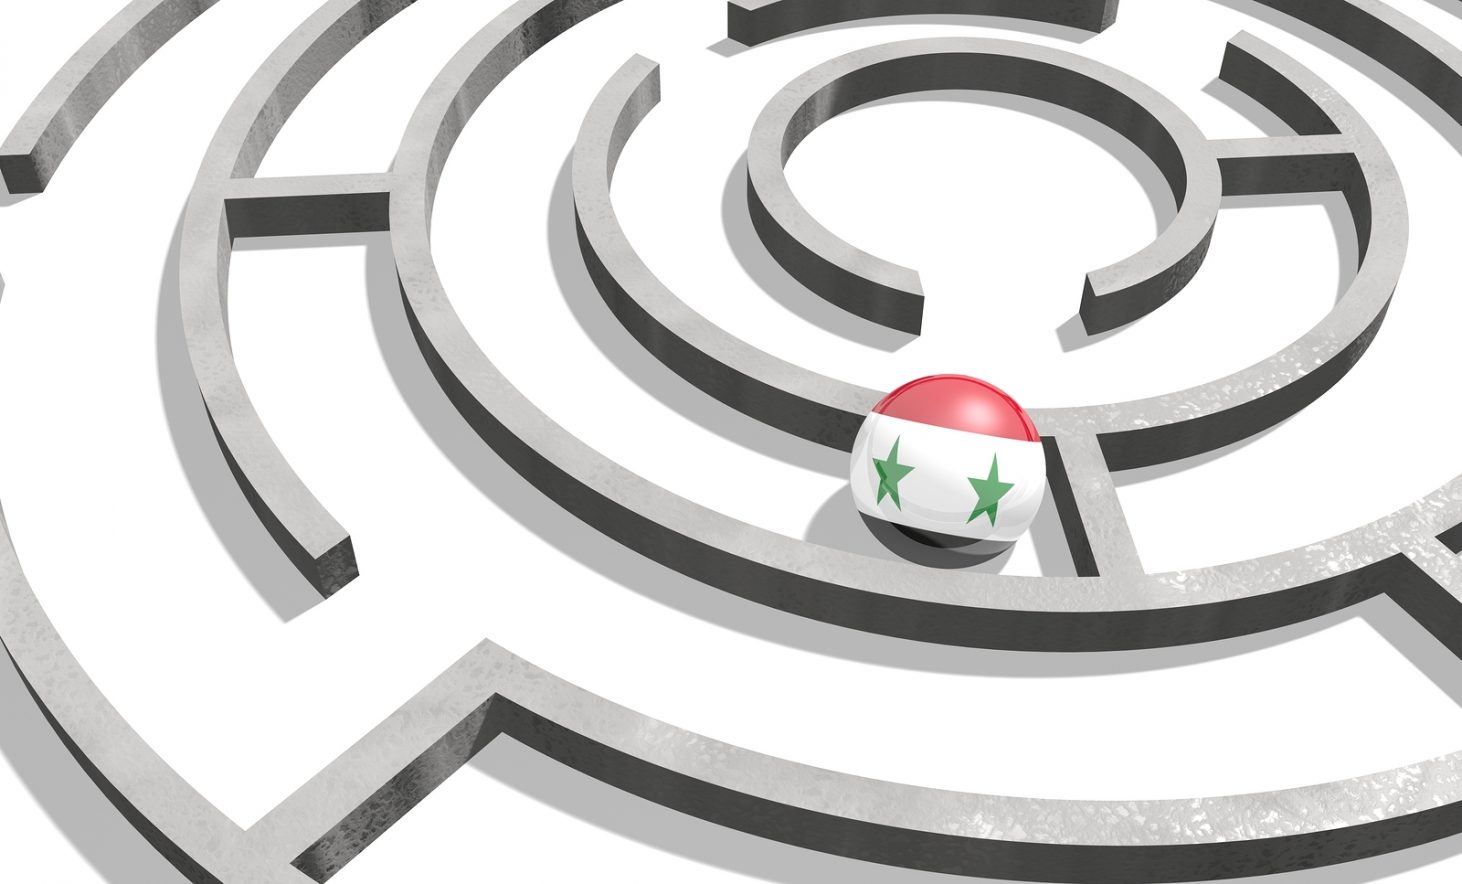 Image relative to politic situation in Syria. National flag textured sphere in labyrinth. 3d rendering